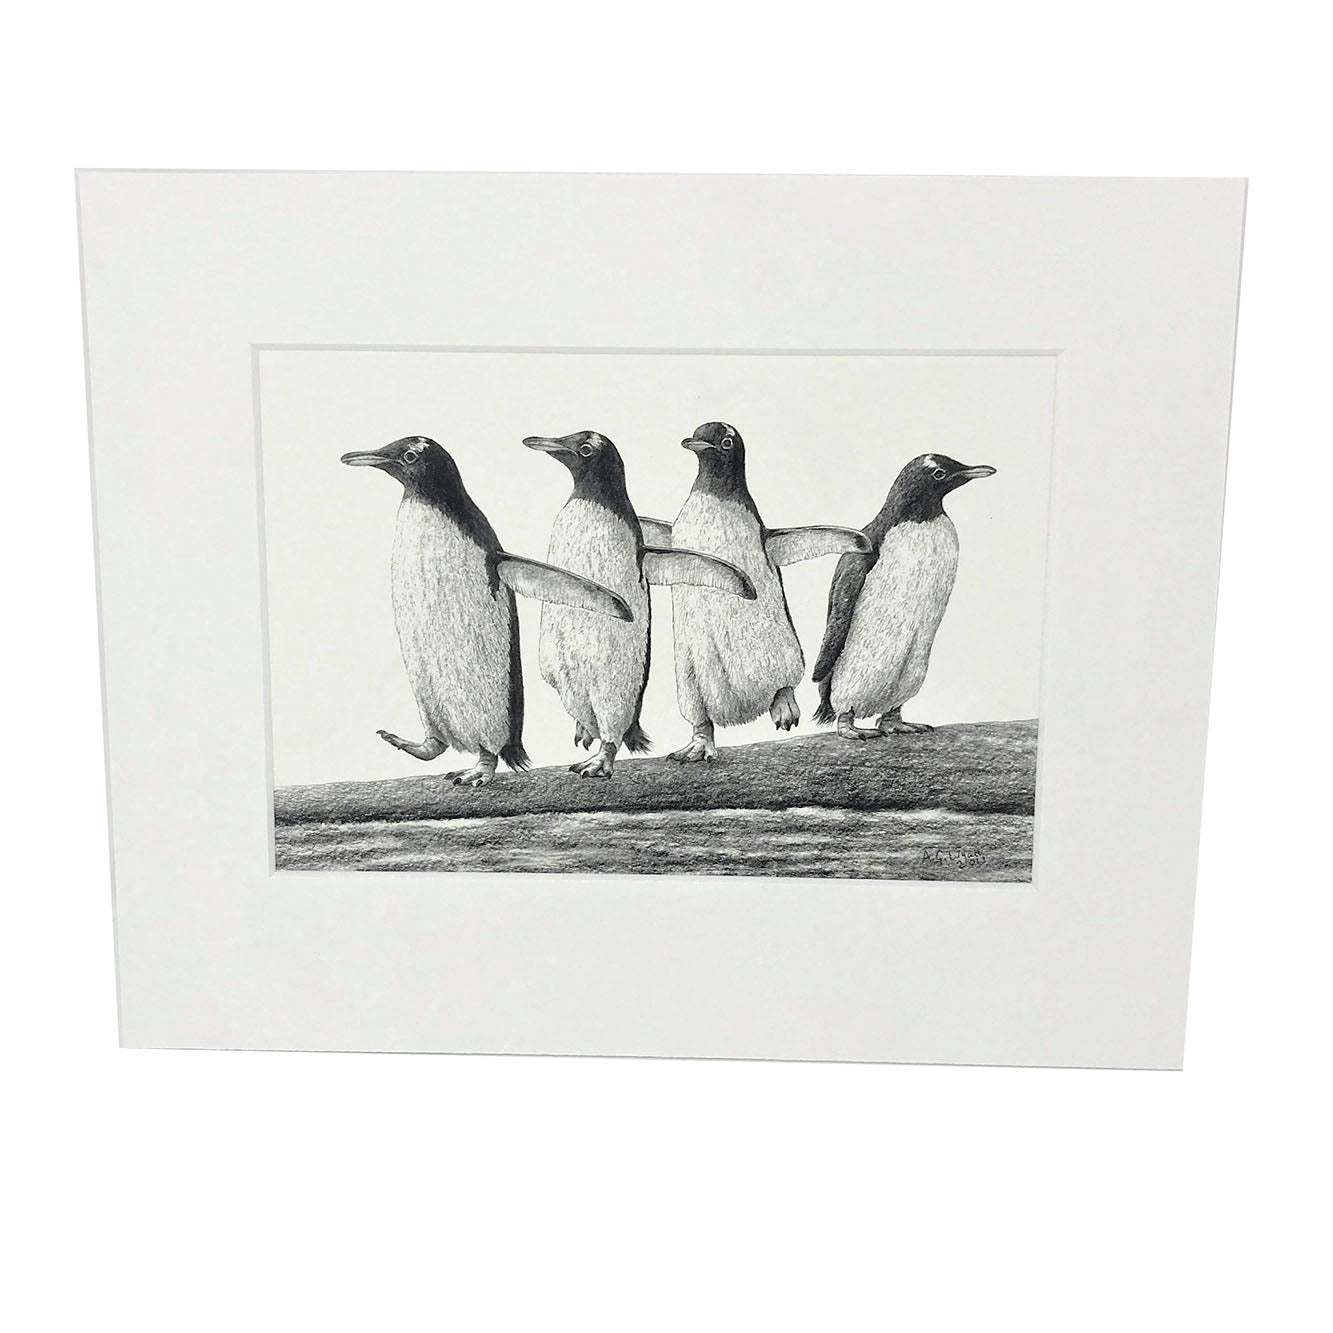 Mounted print of a pencil drawing from artist Anthony Wyatt. Print is of Gentoo penguin's on white mount.   Dimensions: 10x8 including mount. 